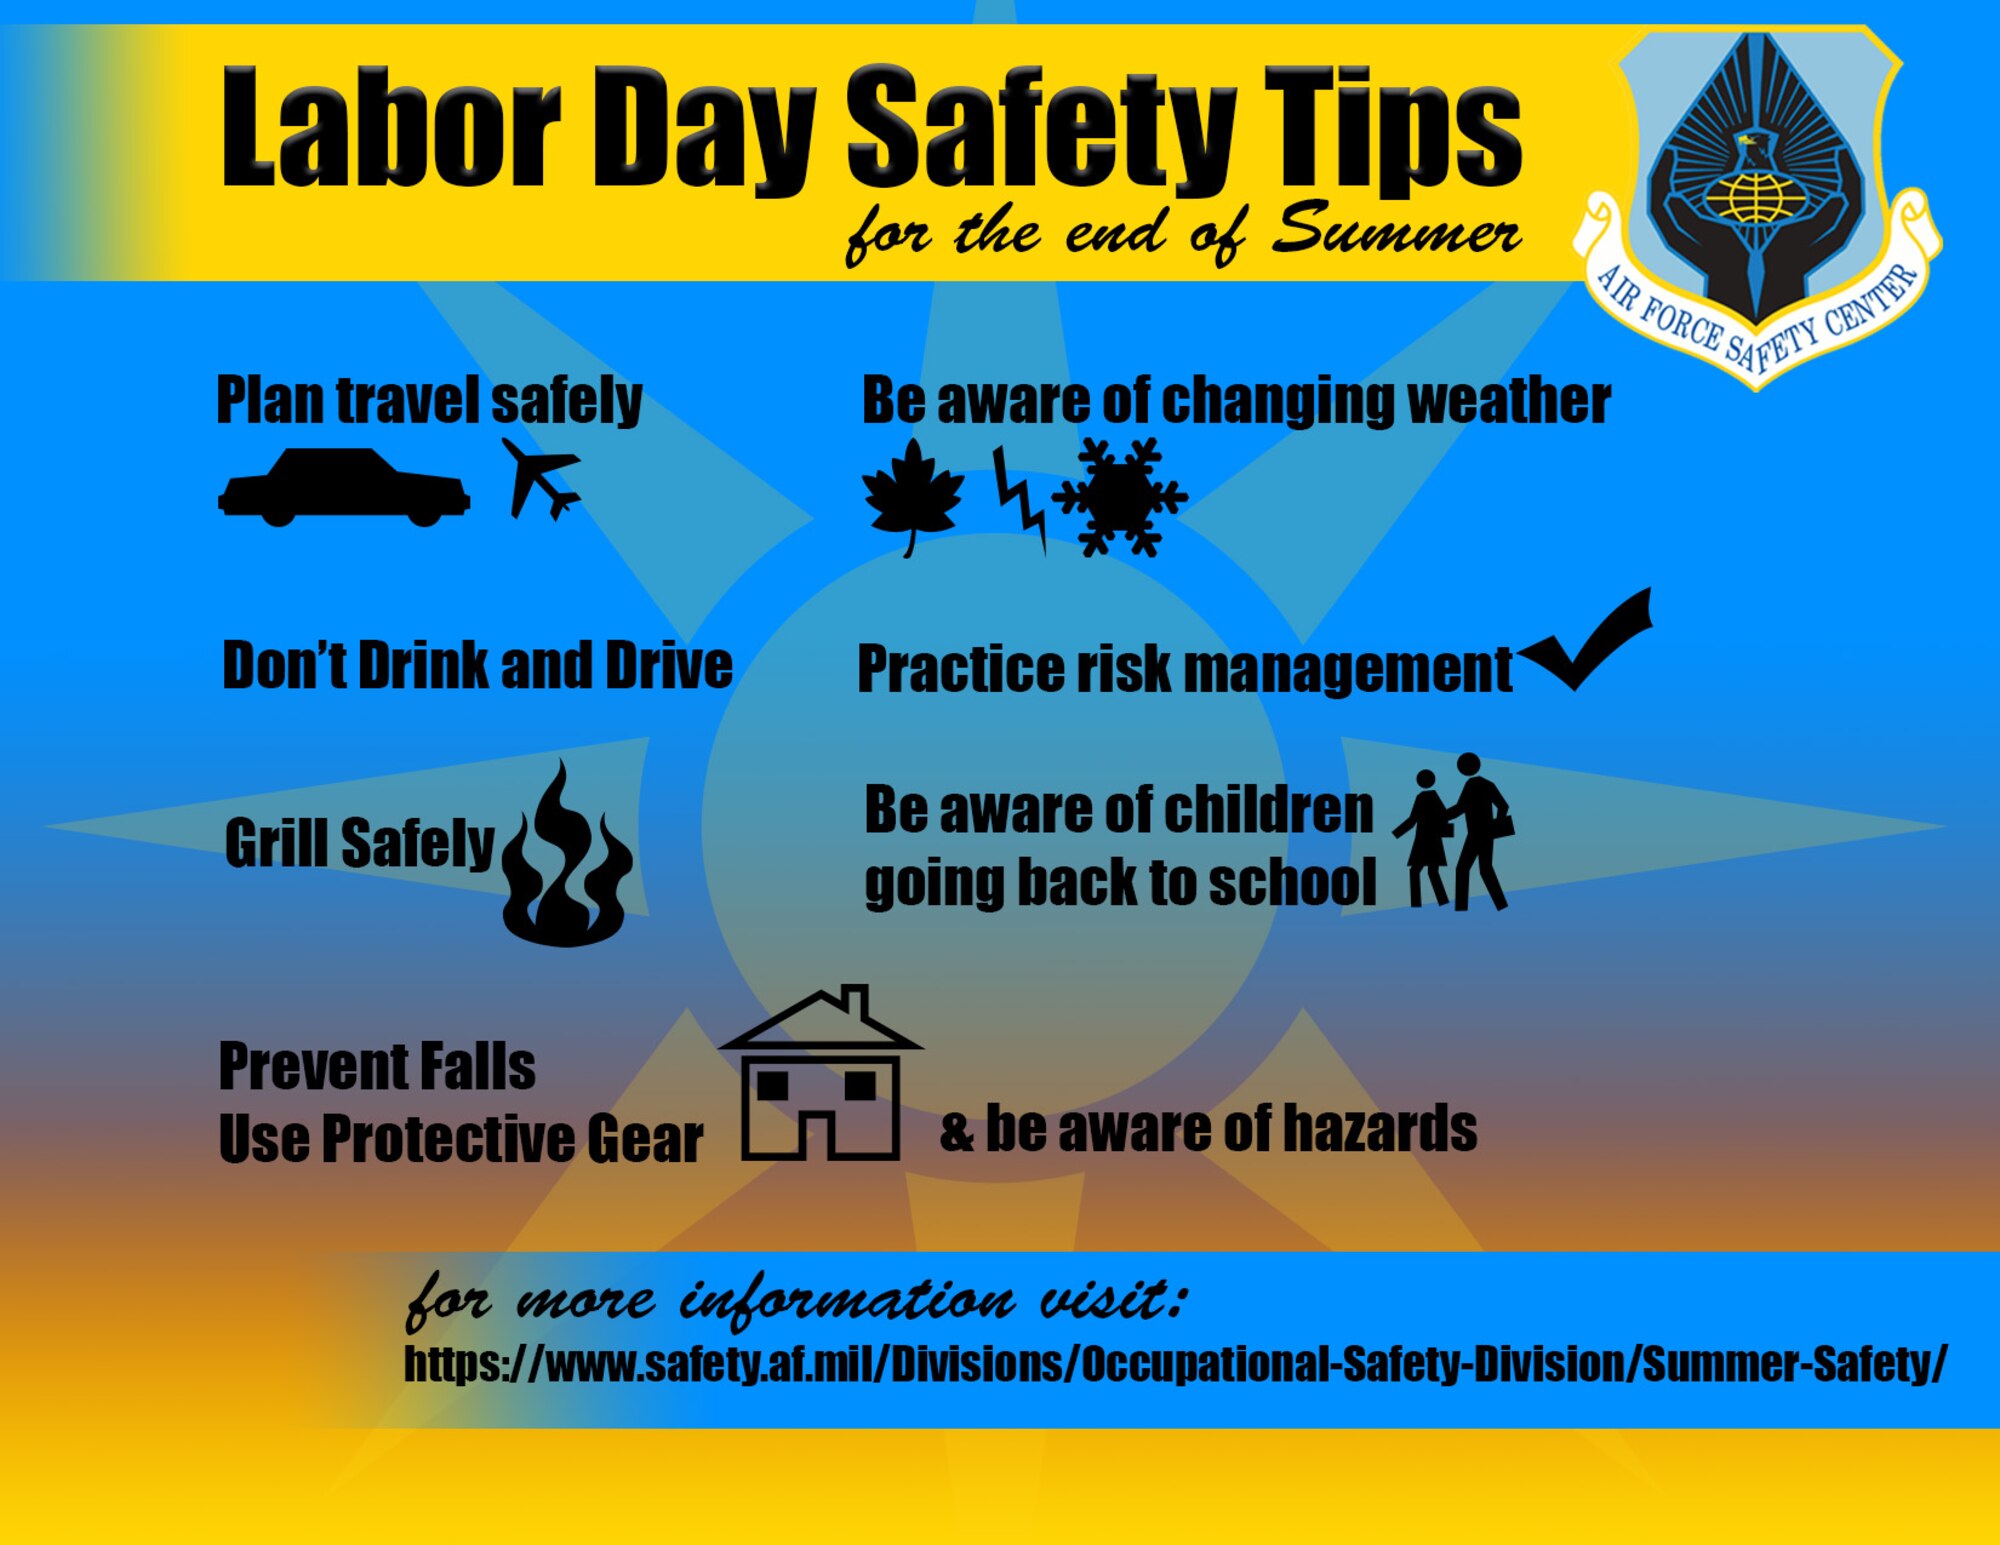 Labor Day Safety tips